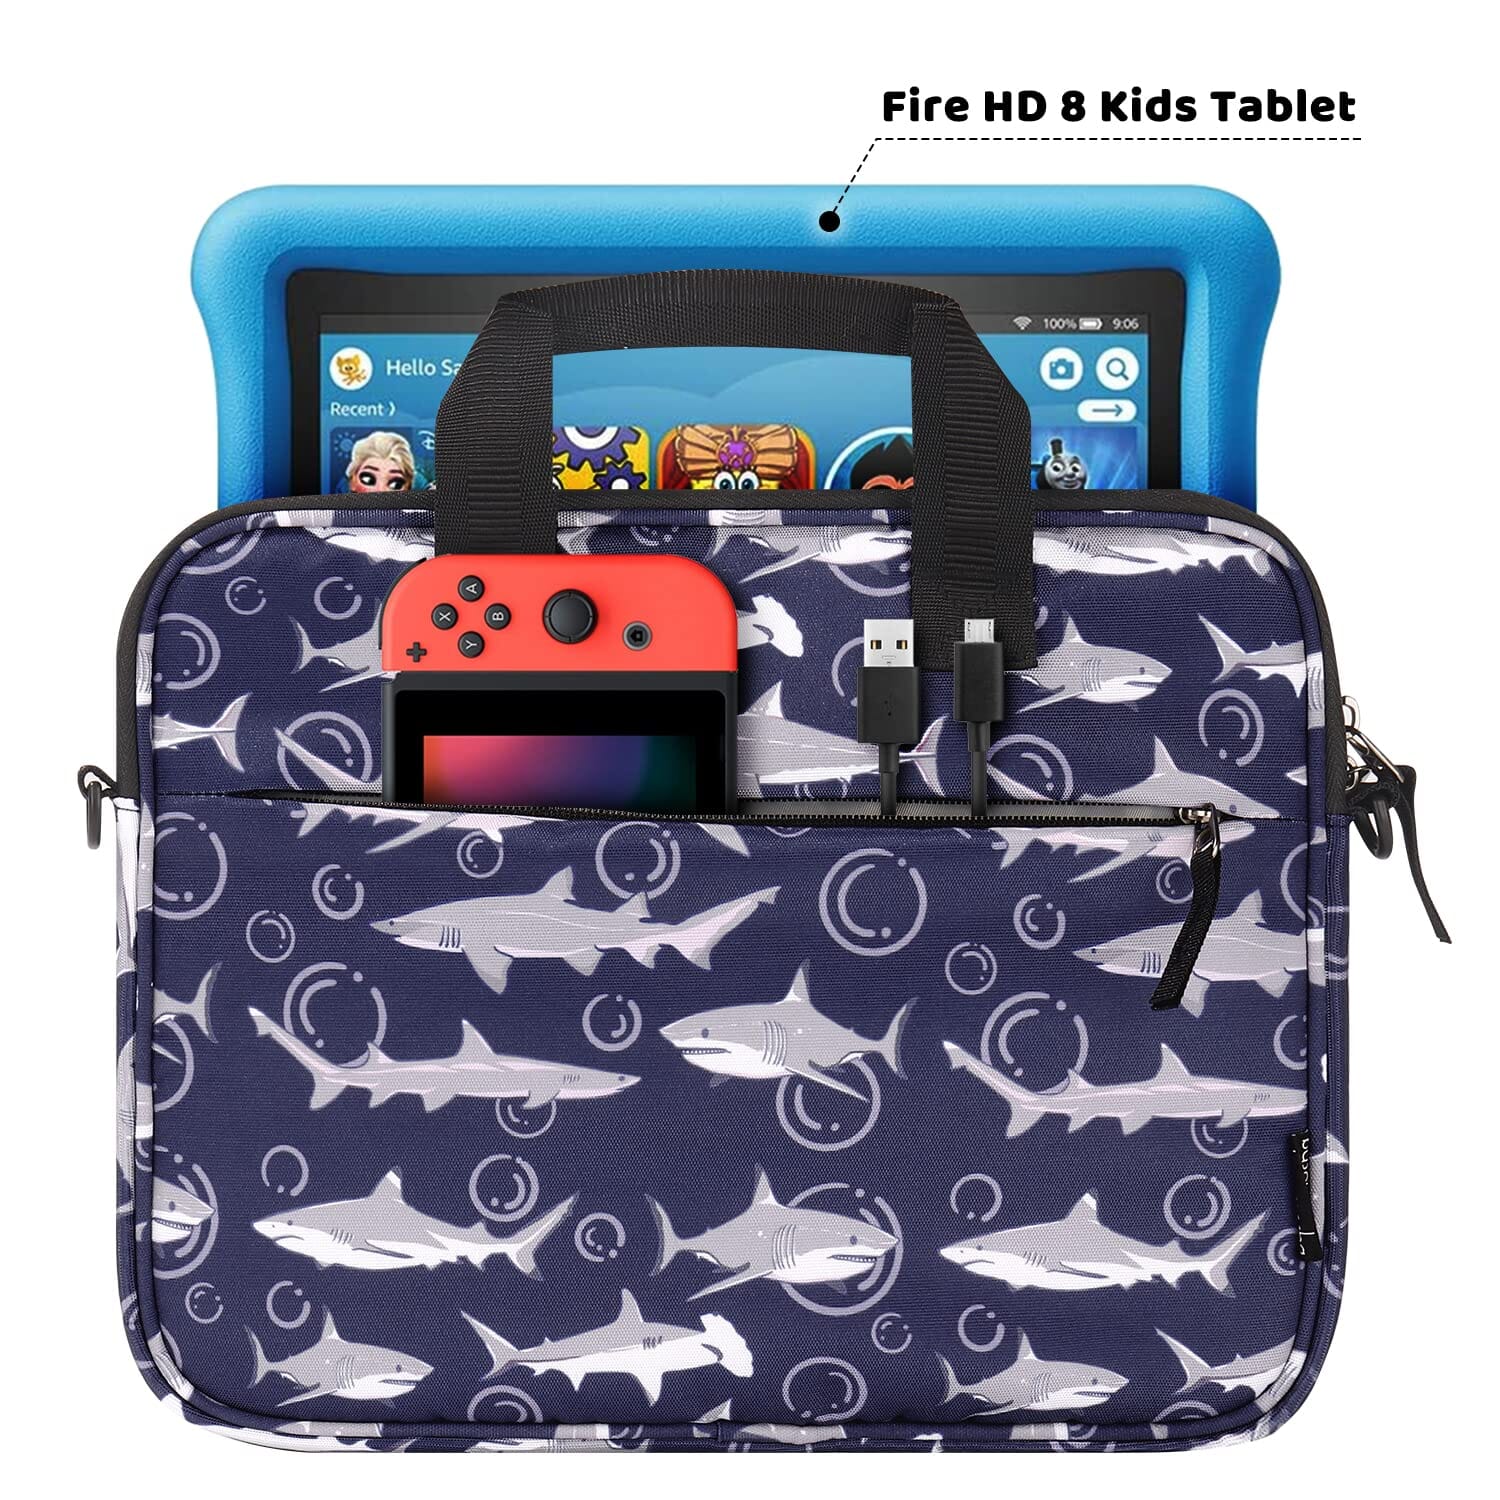 Choco Mocha 12.5 Inch Kids Tablet Sleeve Bag for Boys,Kids Tablet Carrying Case for Fire HD 10, Fire 7, Fire HD 8, Fire 10 Tablet, Kindle Kids Edition, Apple iPad, Navy chocomochakids 